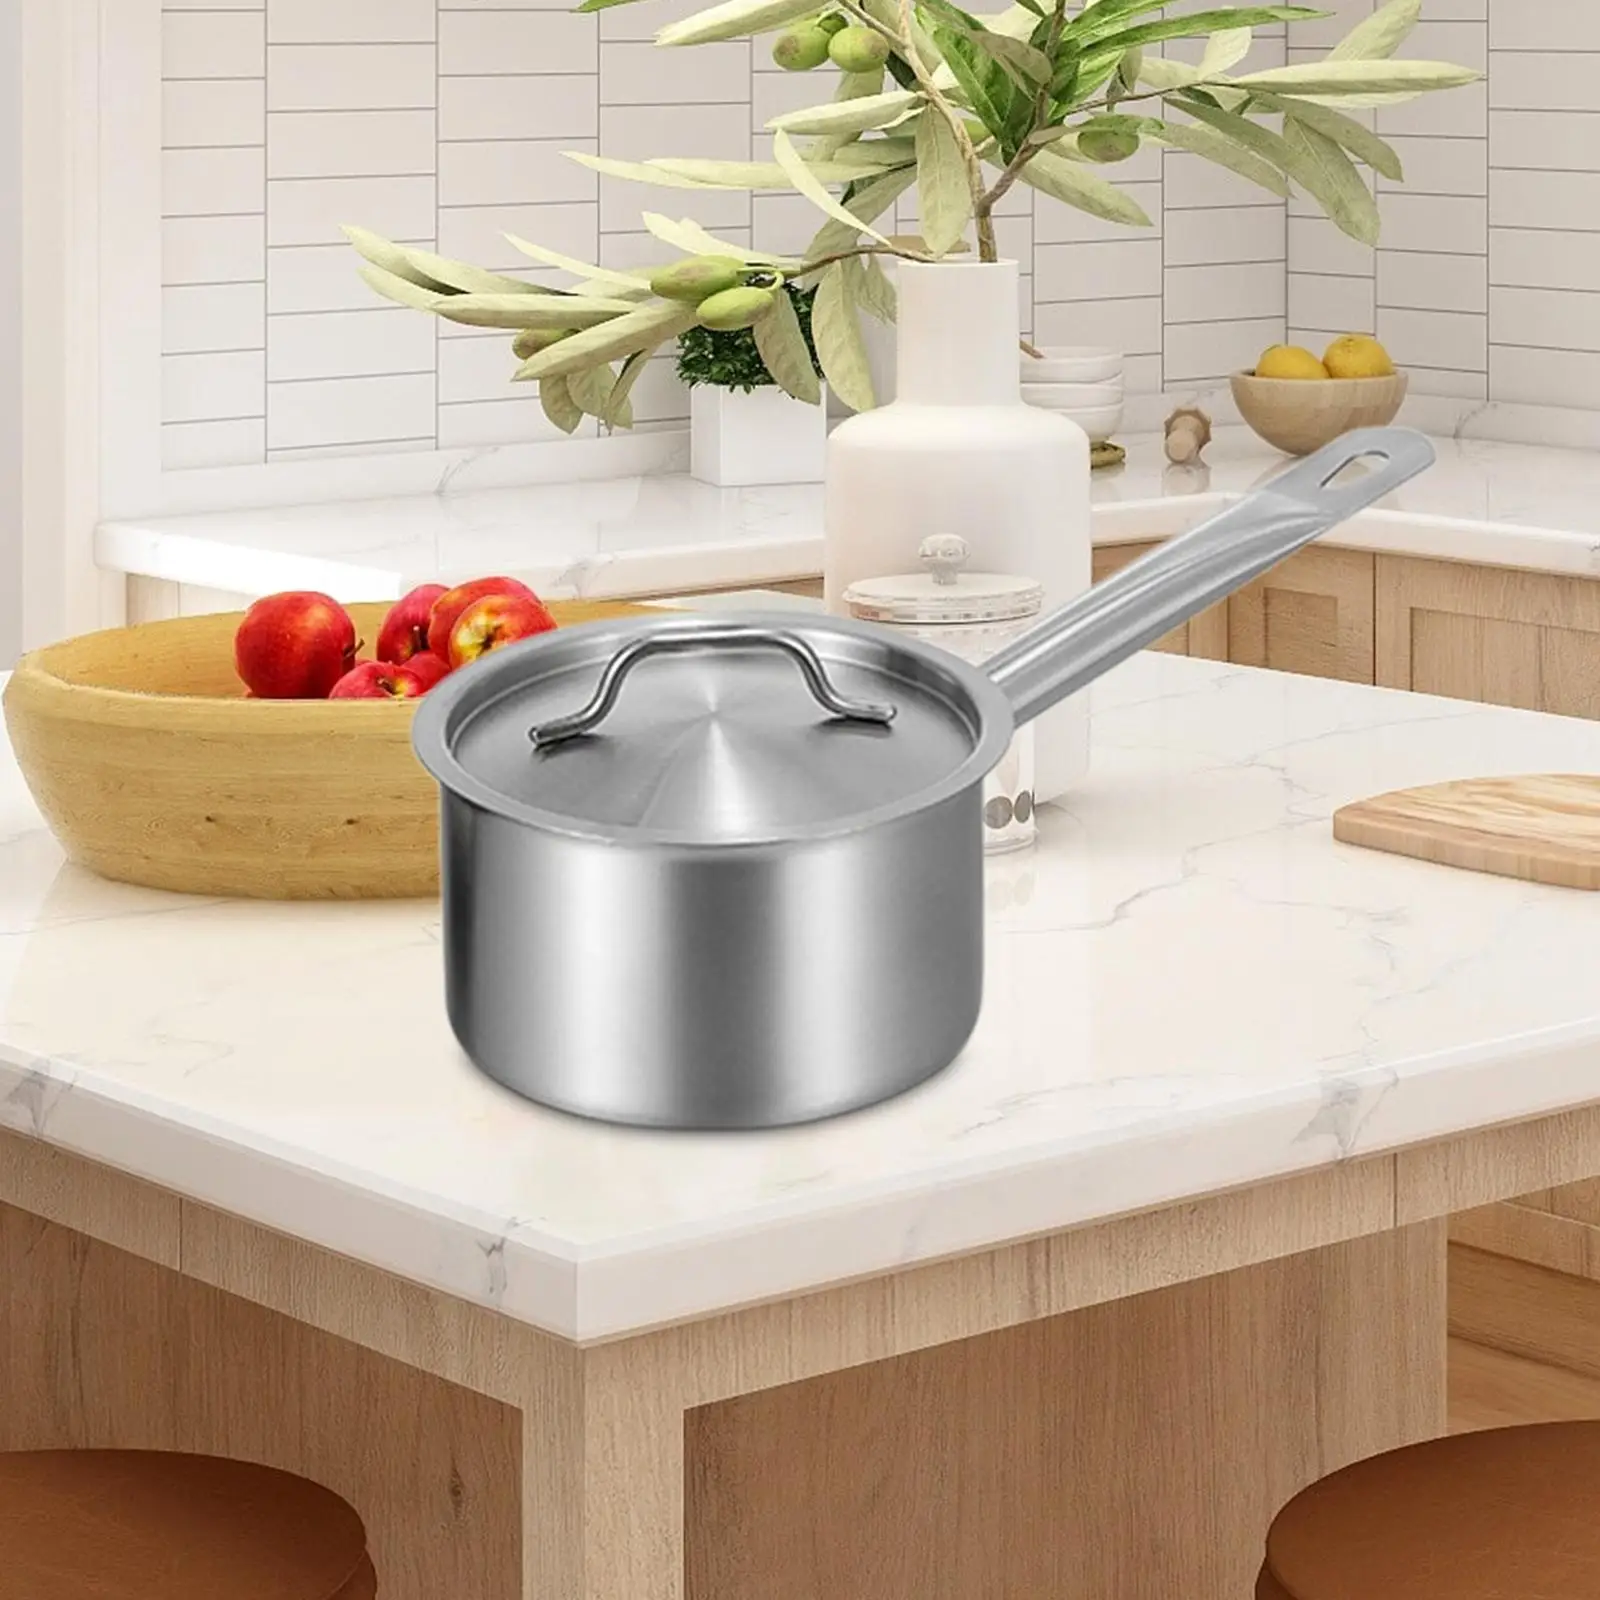 Saucepan with Lid Noodles Portable Stainless Steel Cooking Pot Induction Pot for Hotel Restaurants Kitchen Restaurant Teahouse